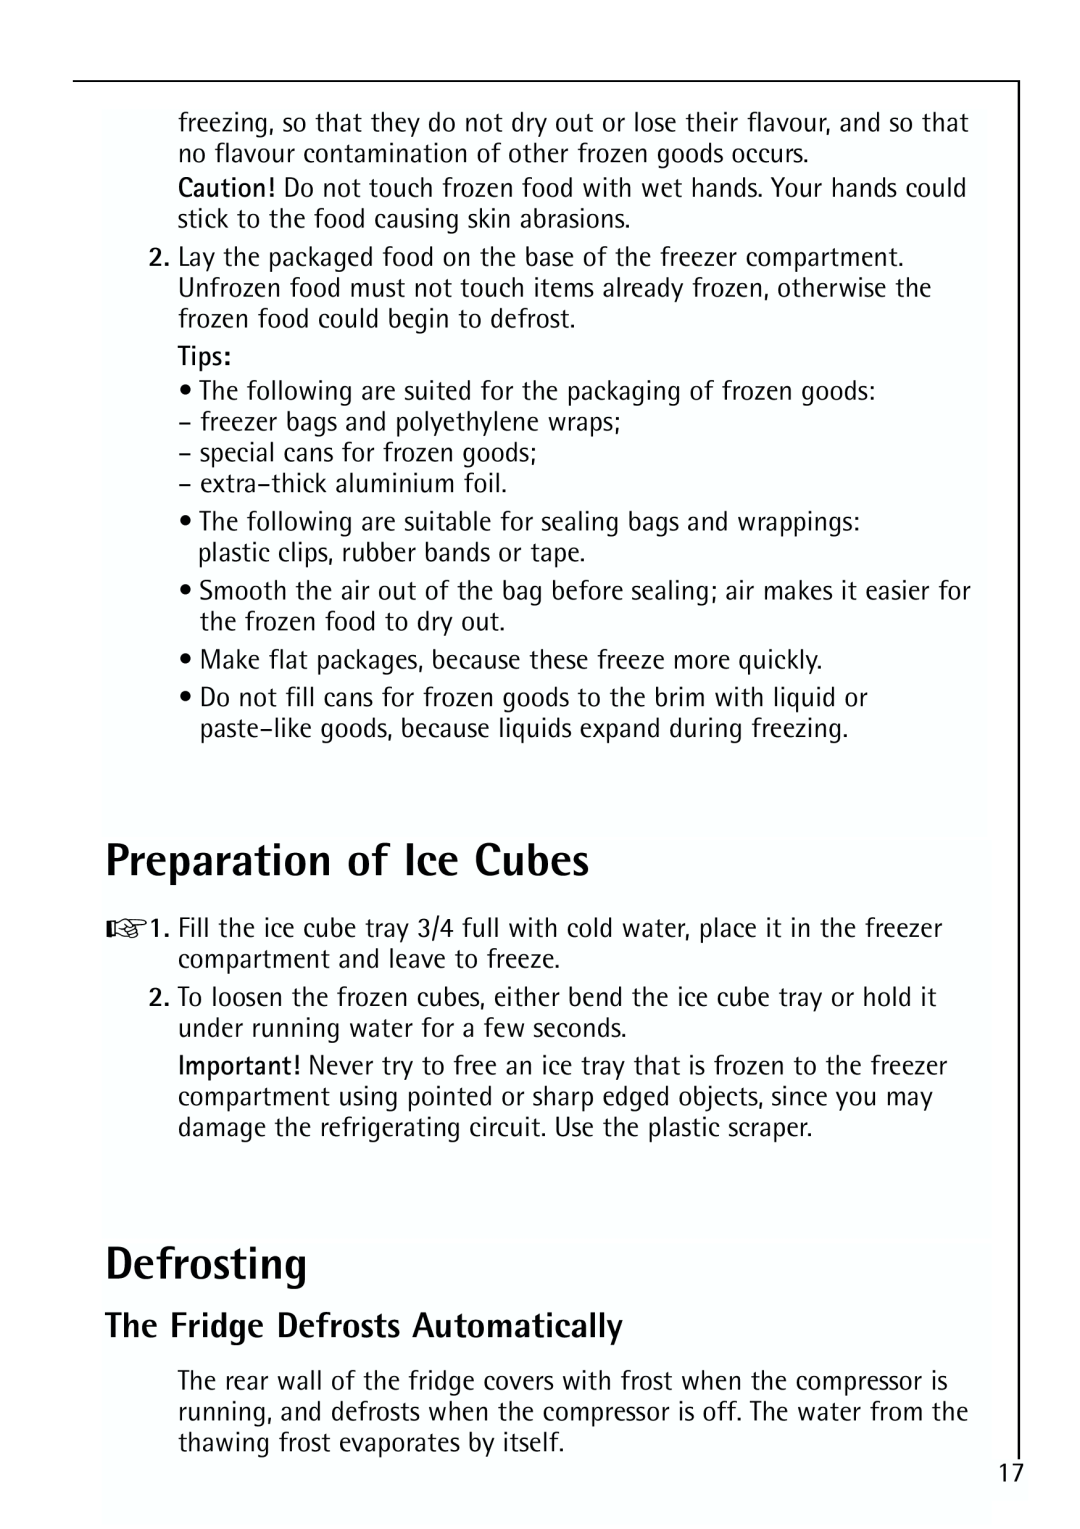 Electrolux 64150 TK manual Preparation of Ice Cubes, Defrosting, The Fridge Defrosts Automatically, Tips 